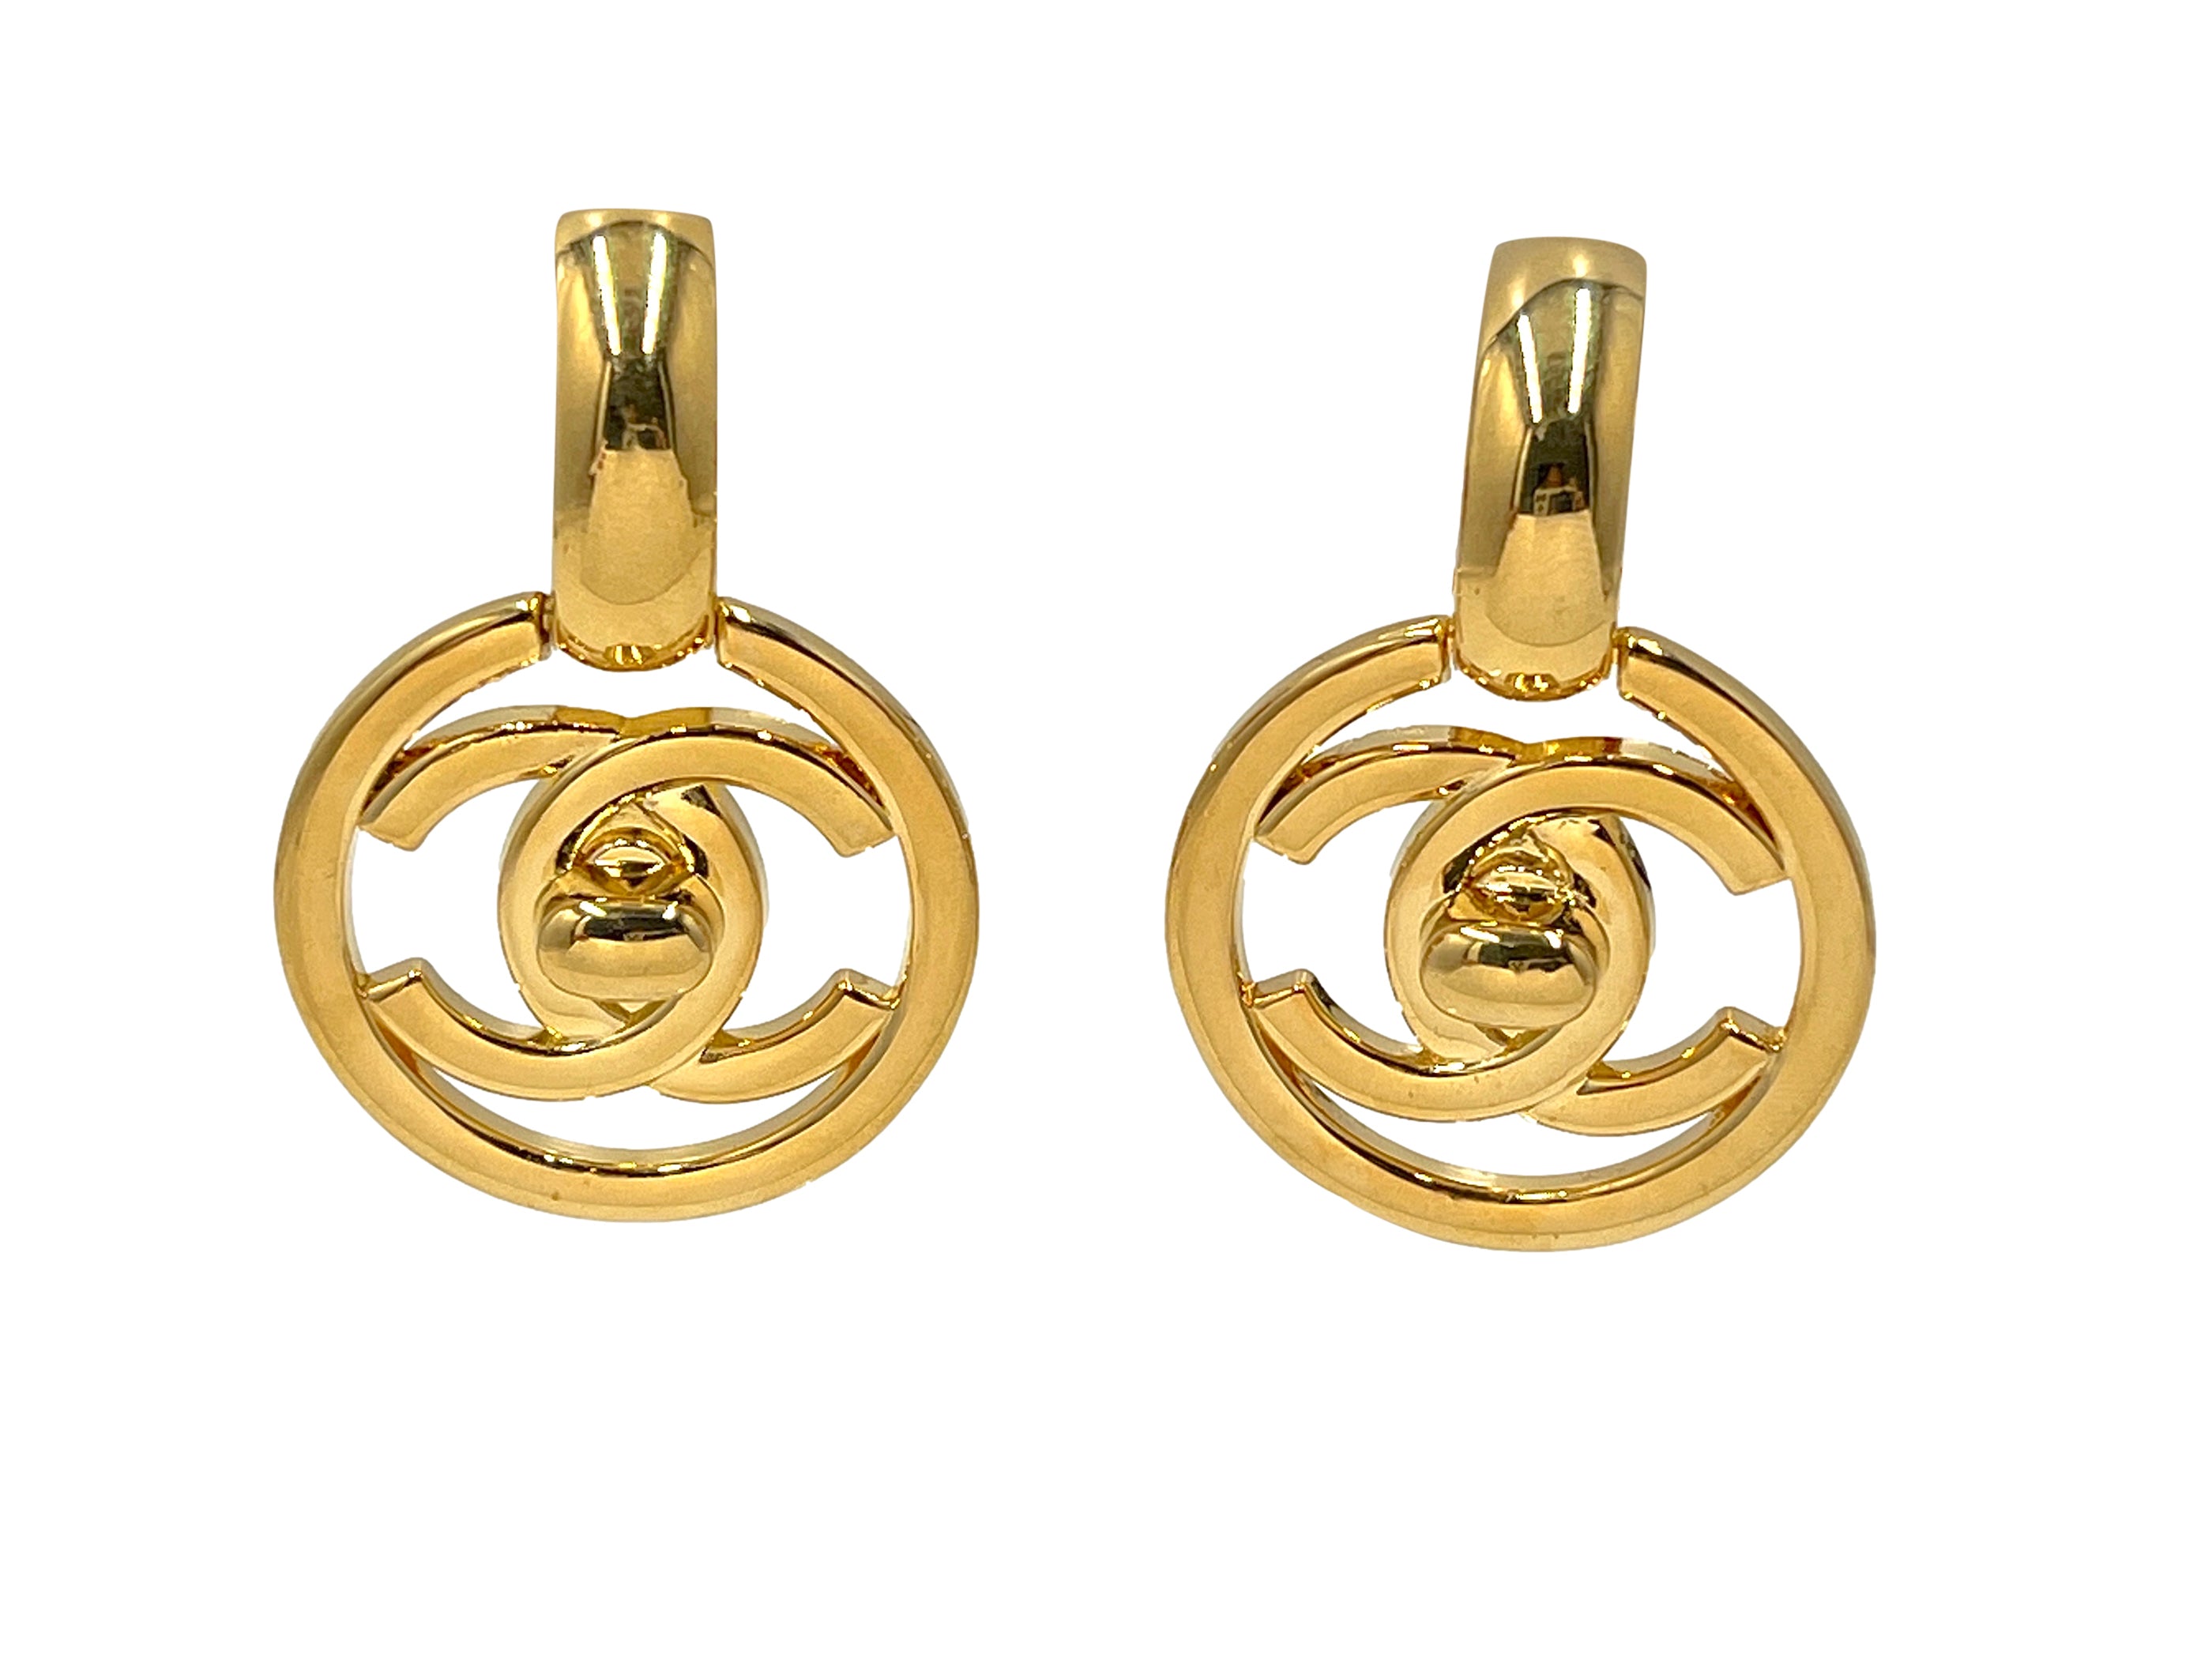 Vintage Chanel 97P 1997 Spring Gold CC Clip on Earrings